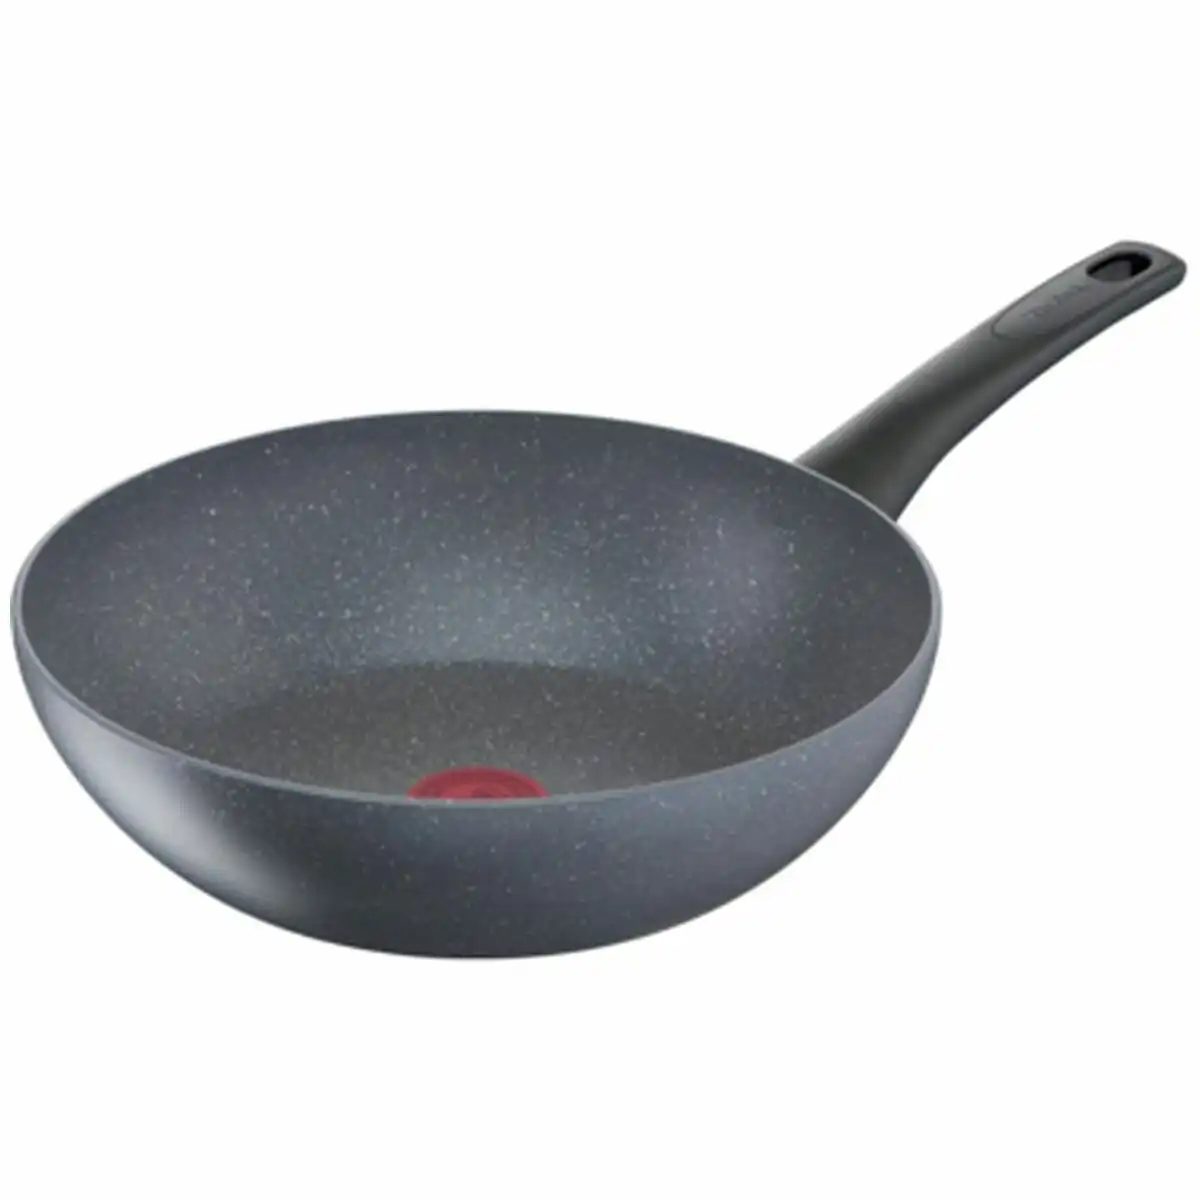 Tefal 28cm Healthy Chef Non-stick Induction Wok